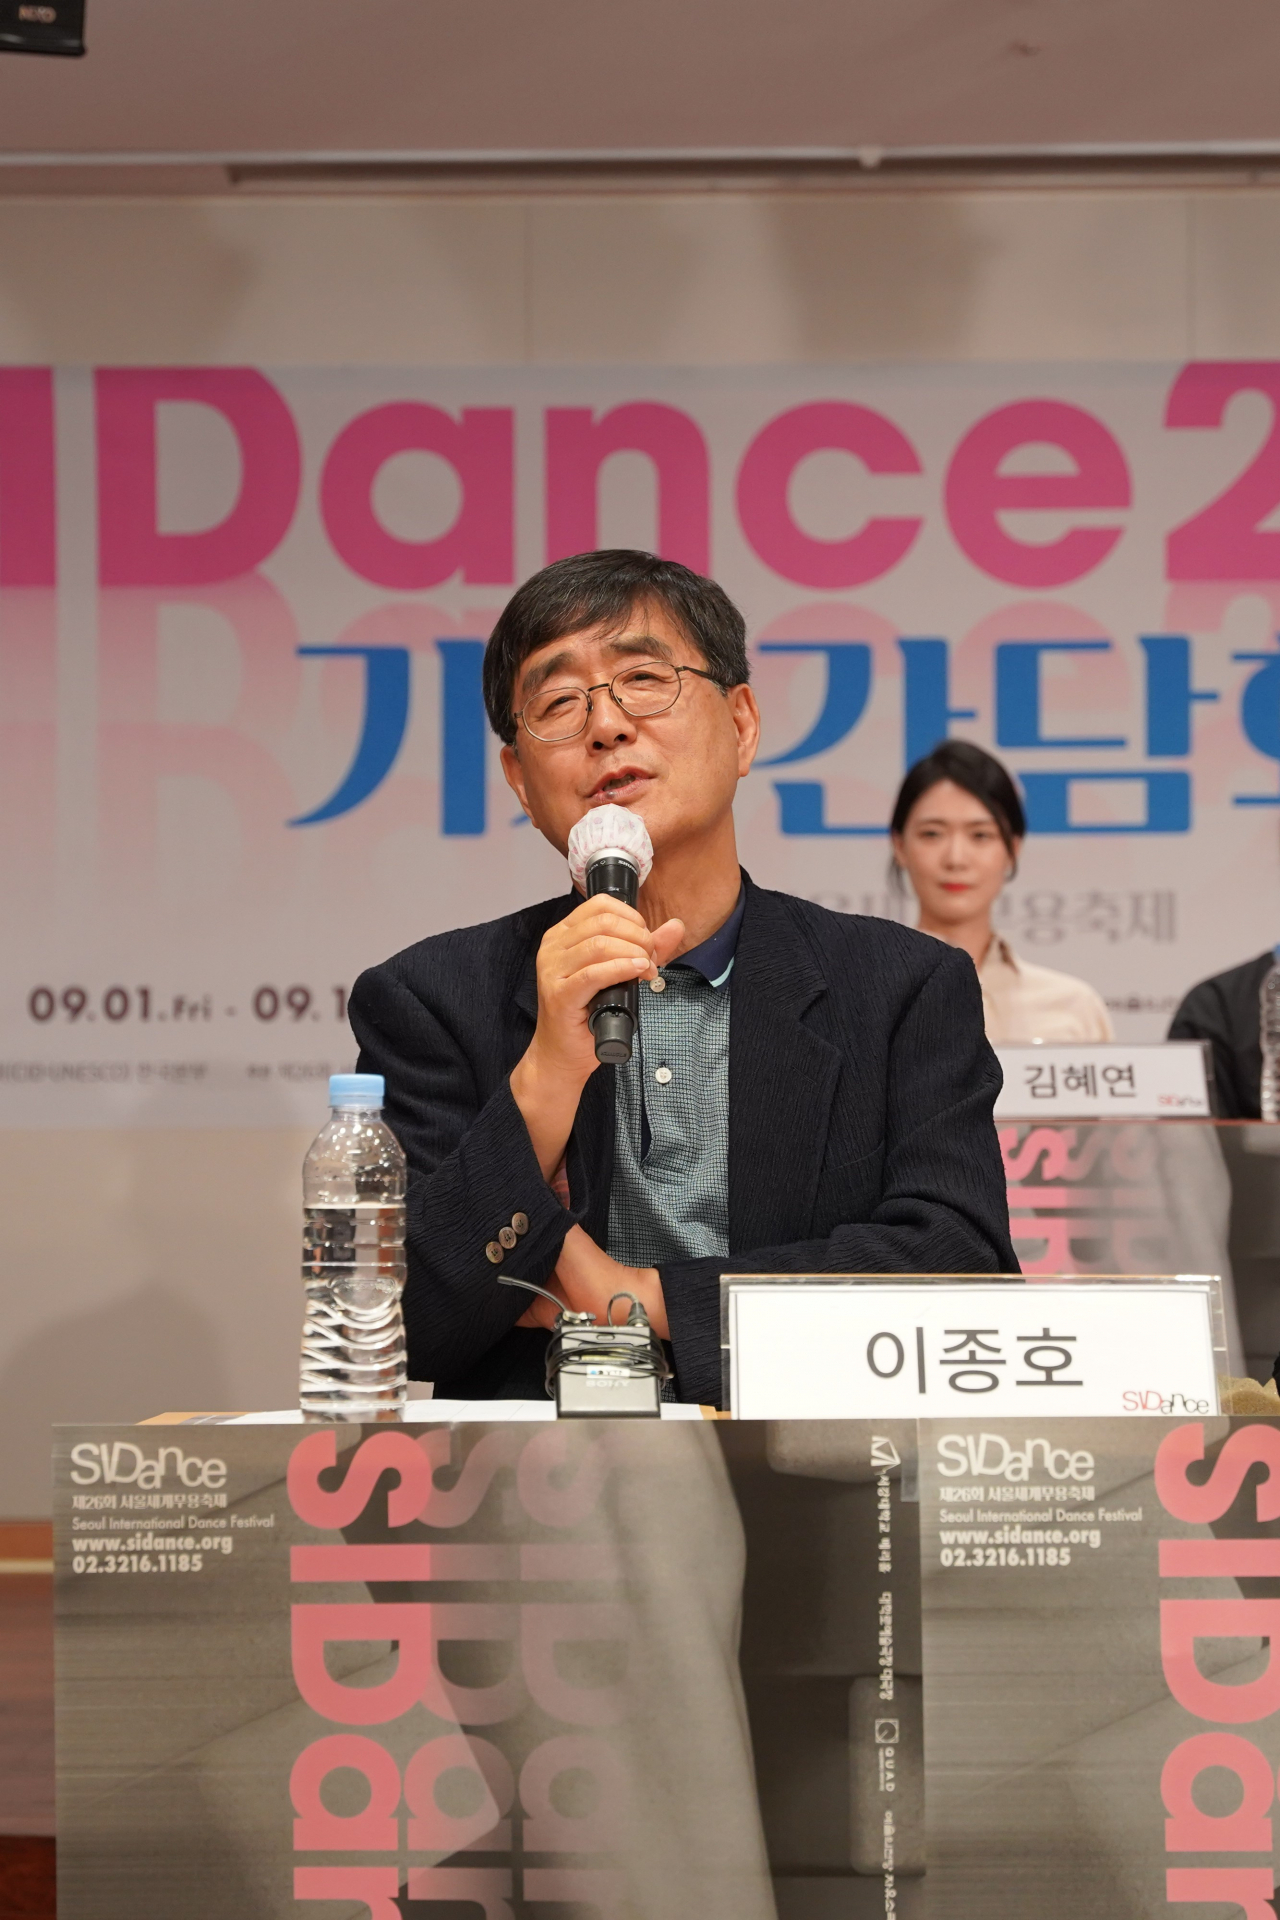 Artistic director Lee Jong-ho speaks during a press conference held on Aug. 18. (SIDance)